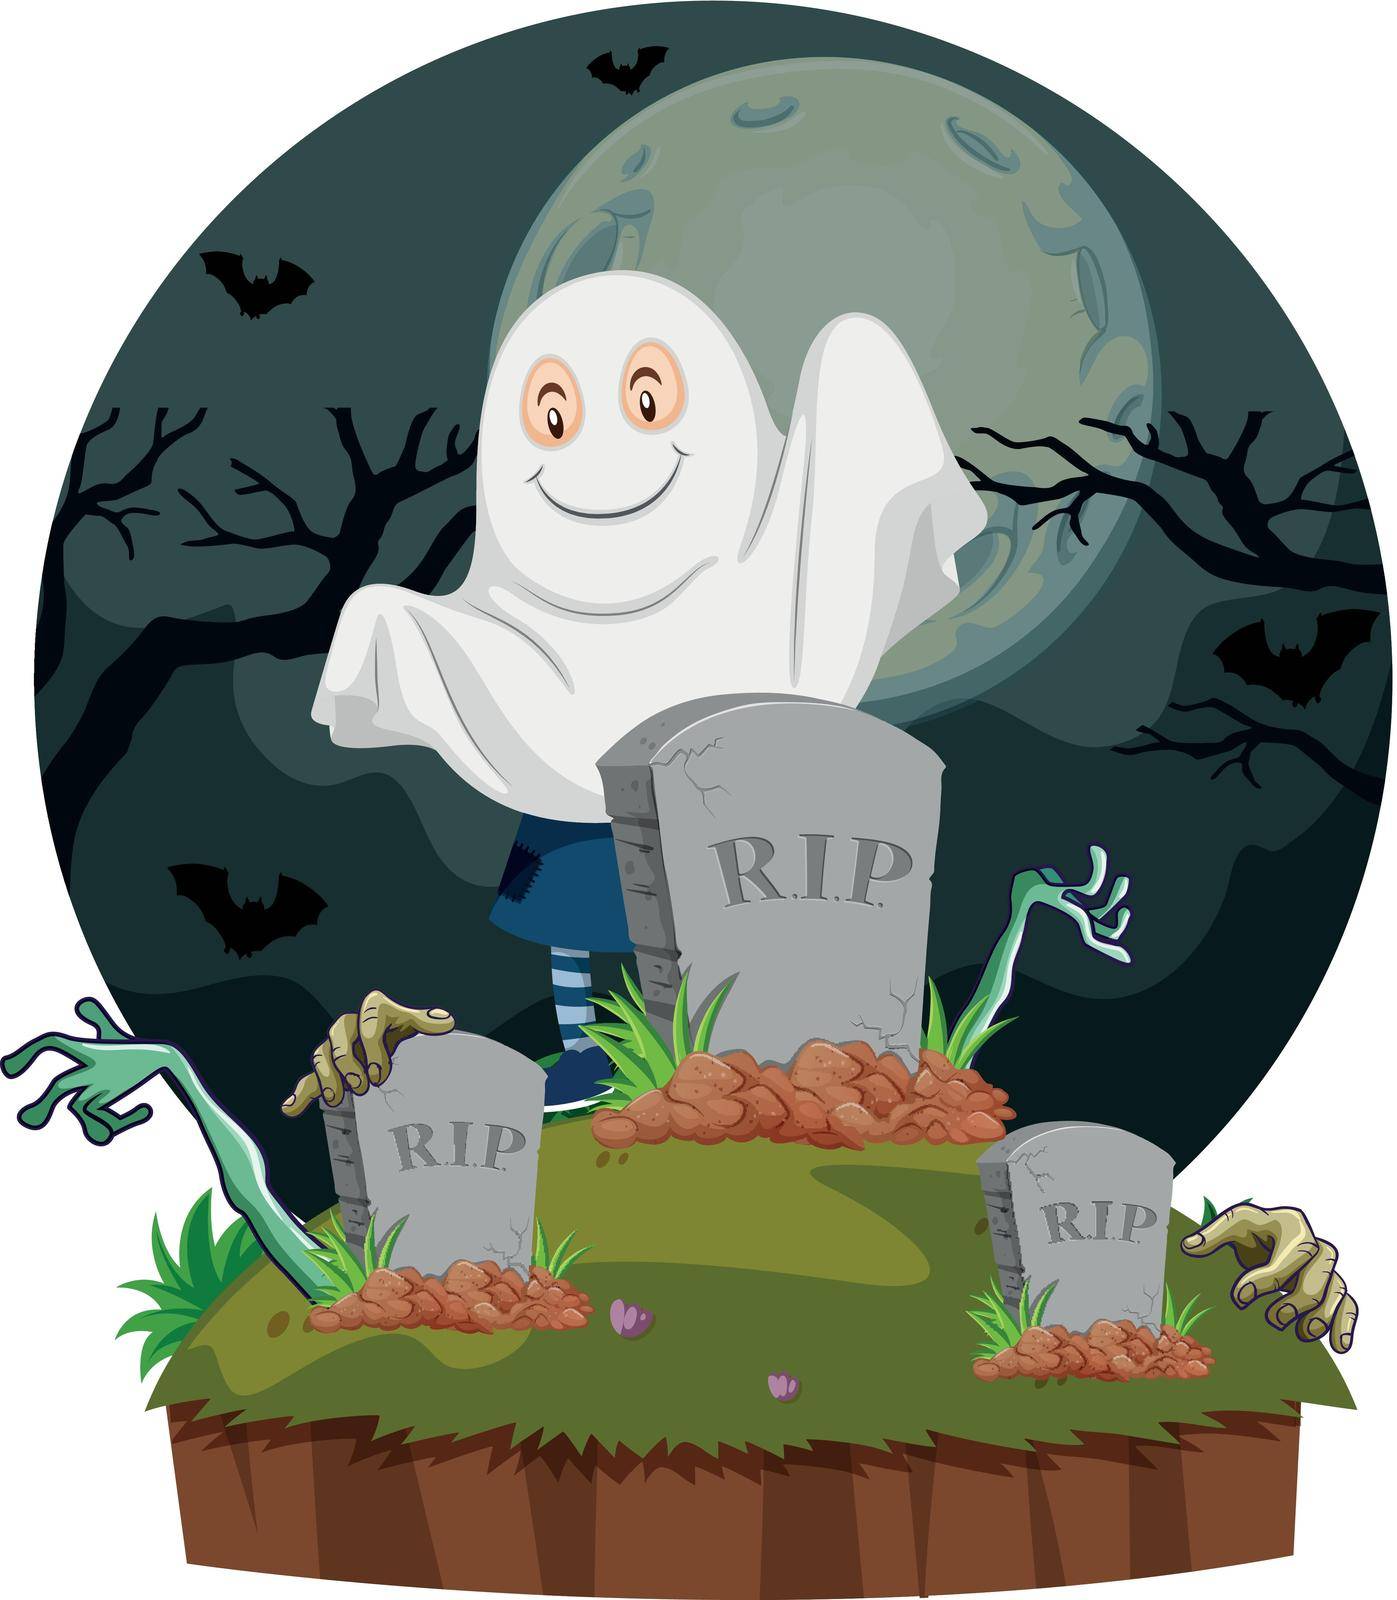 Scene with ghost in graveyard illustration